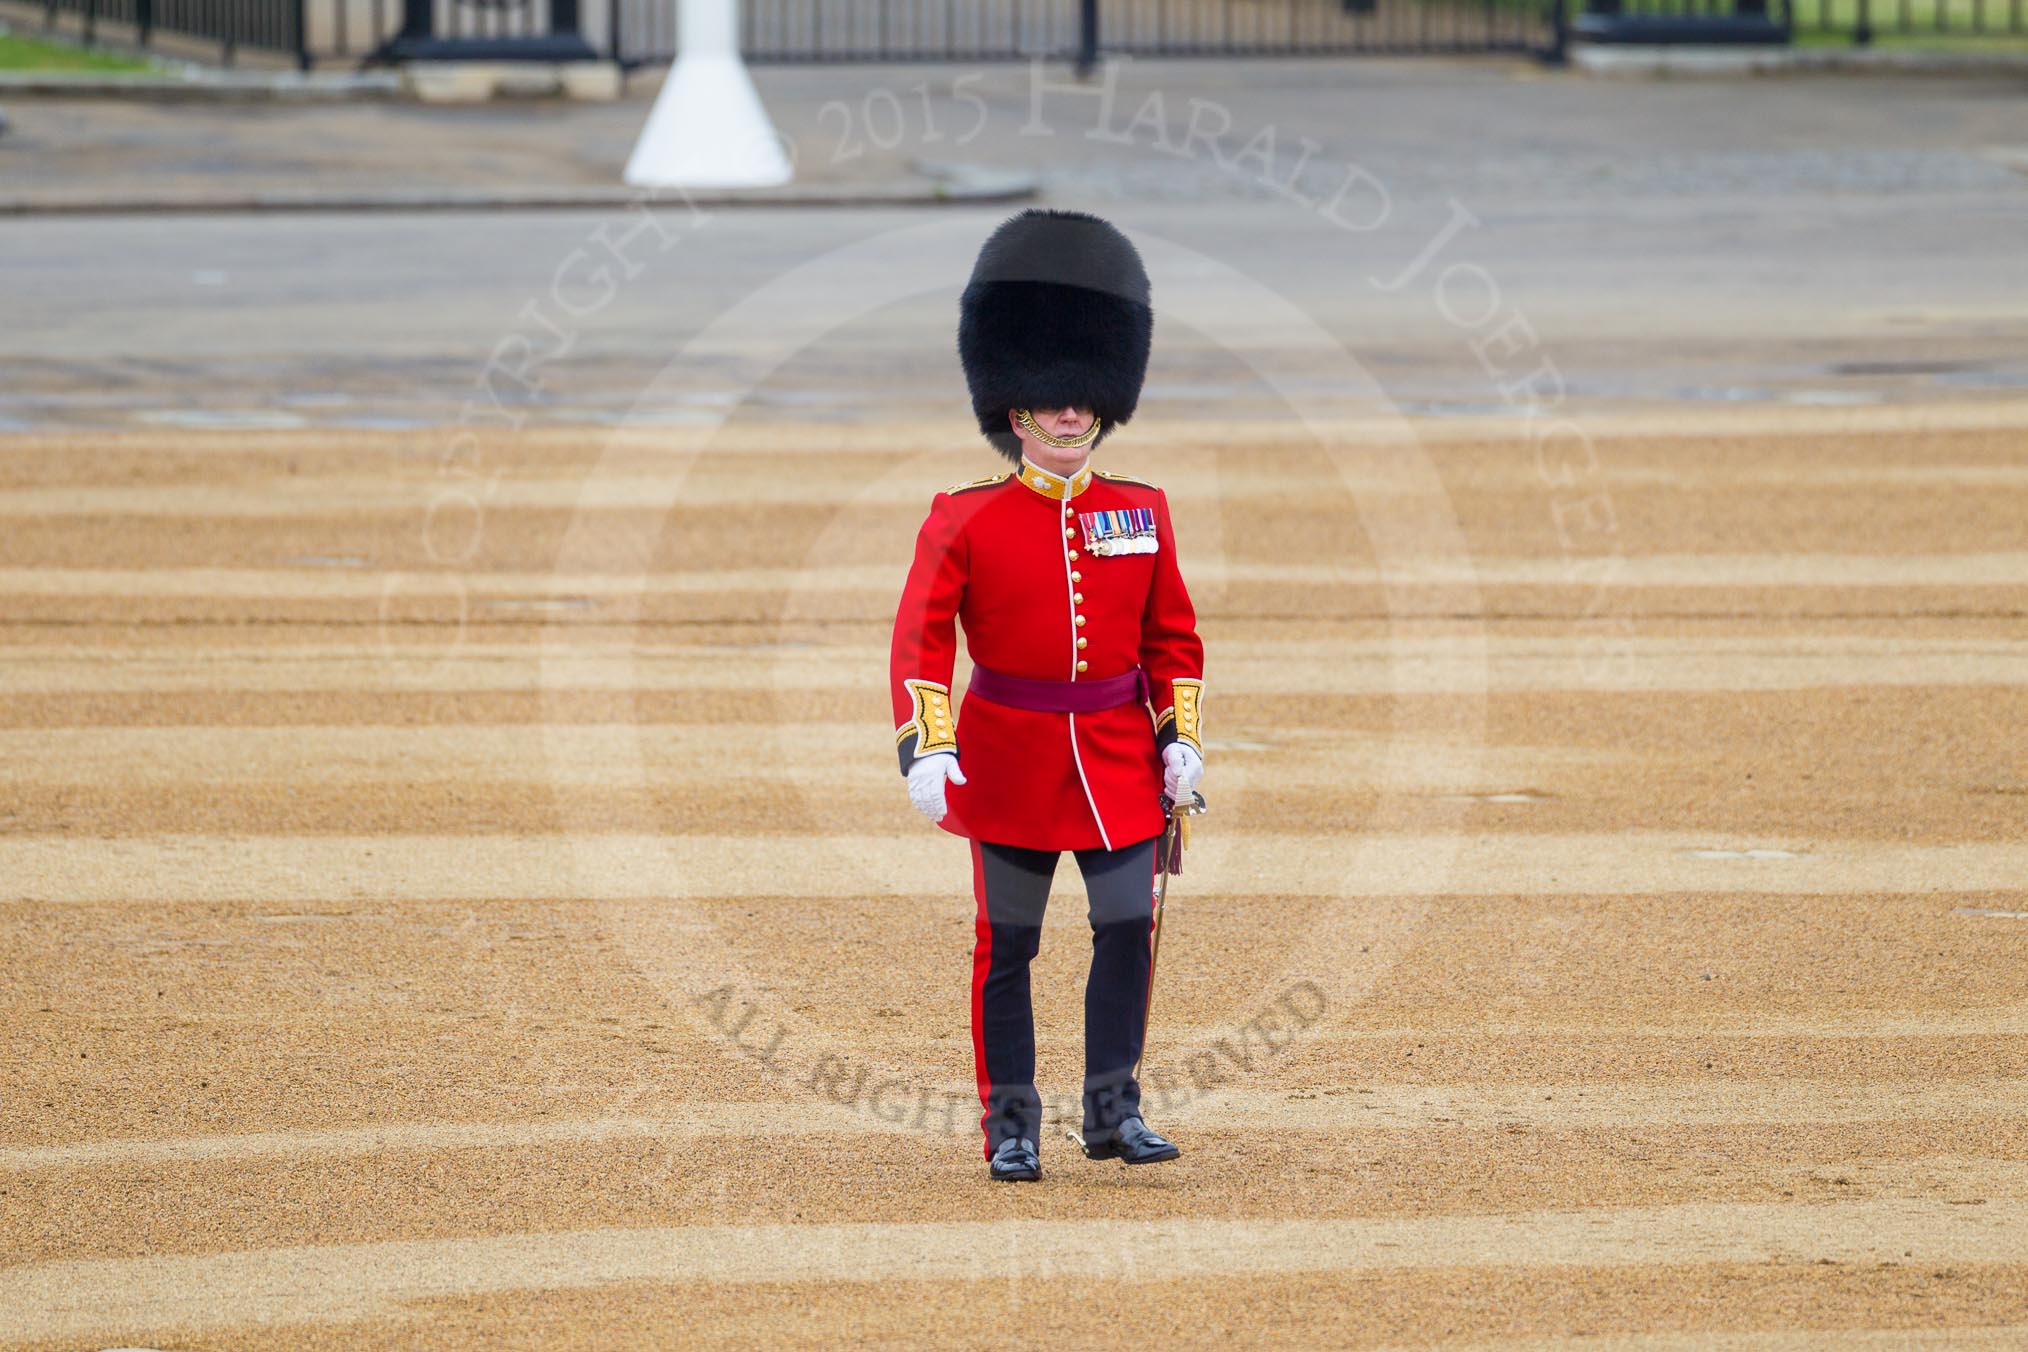 The Colonel's Review 2016.
Horse Guards Parade, Westminster,
London,

United Kingdom,
on 04 June 2016 at 10:08, image #29